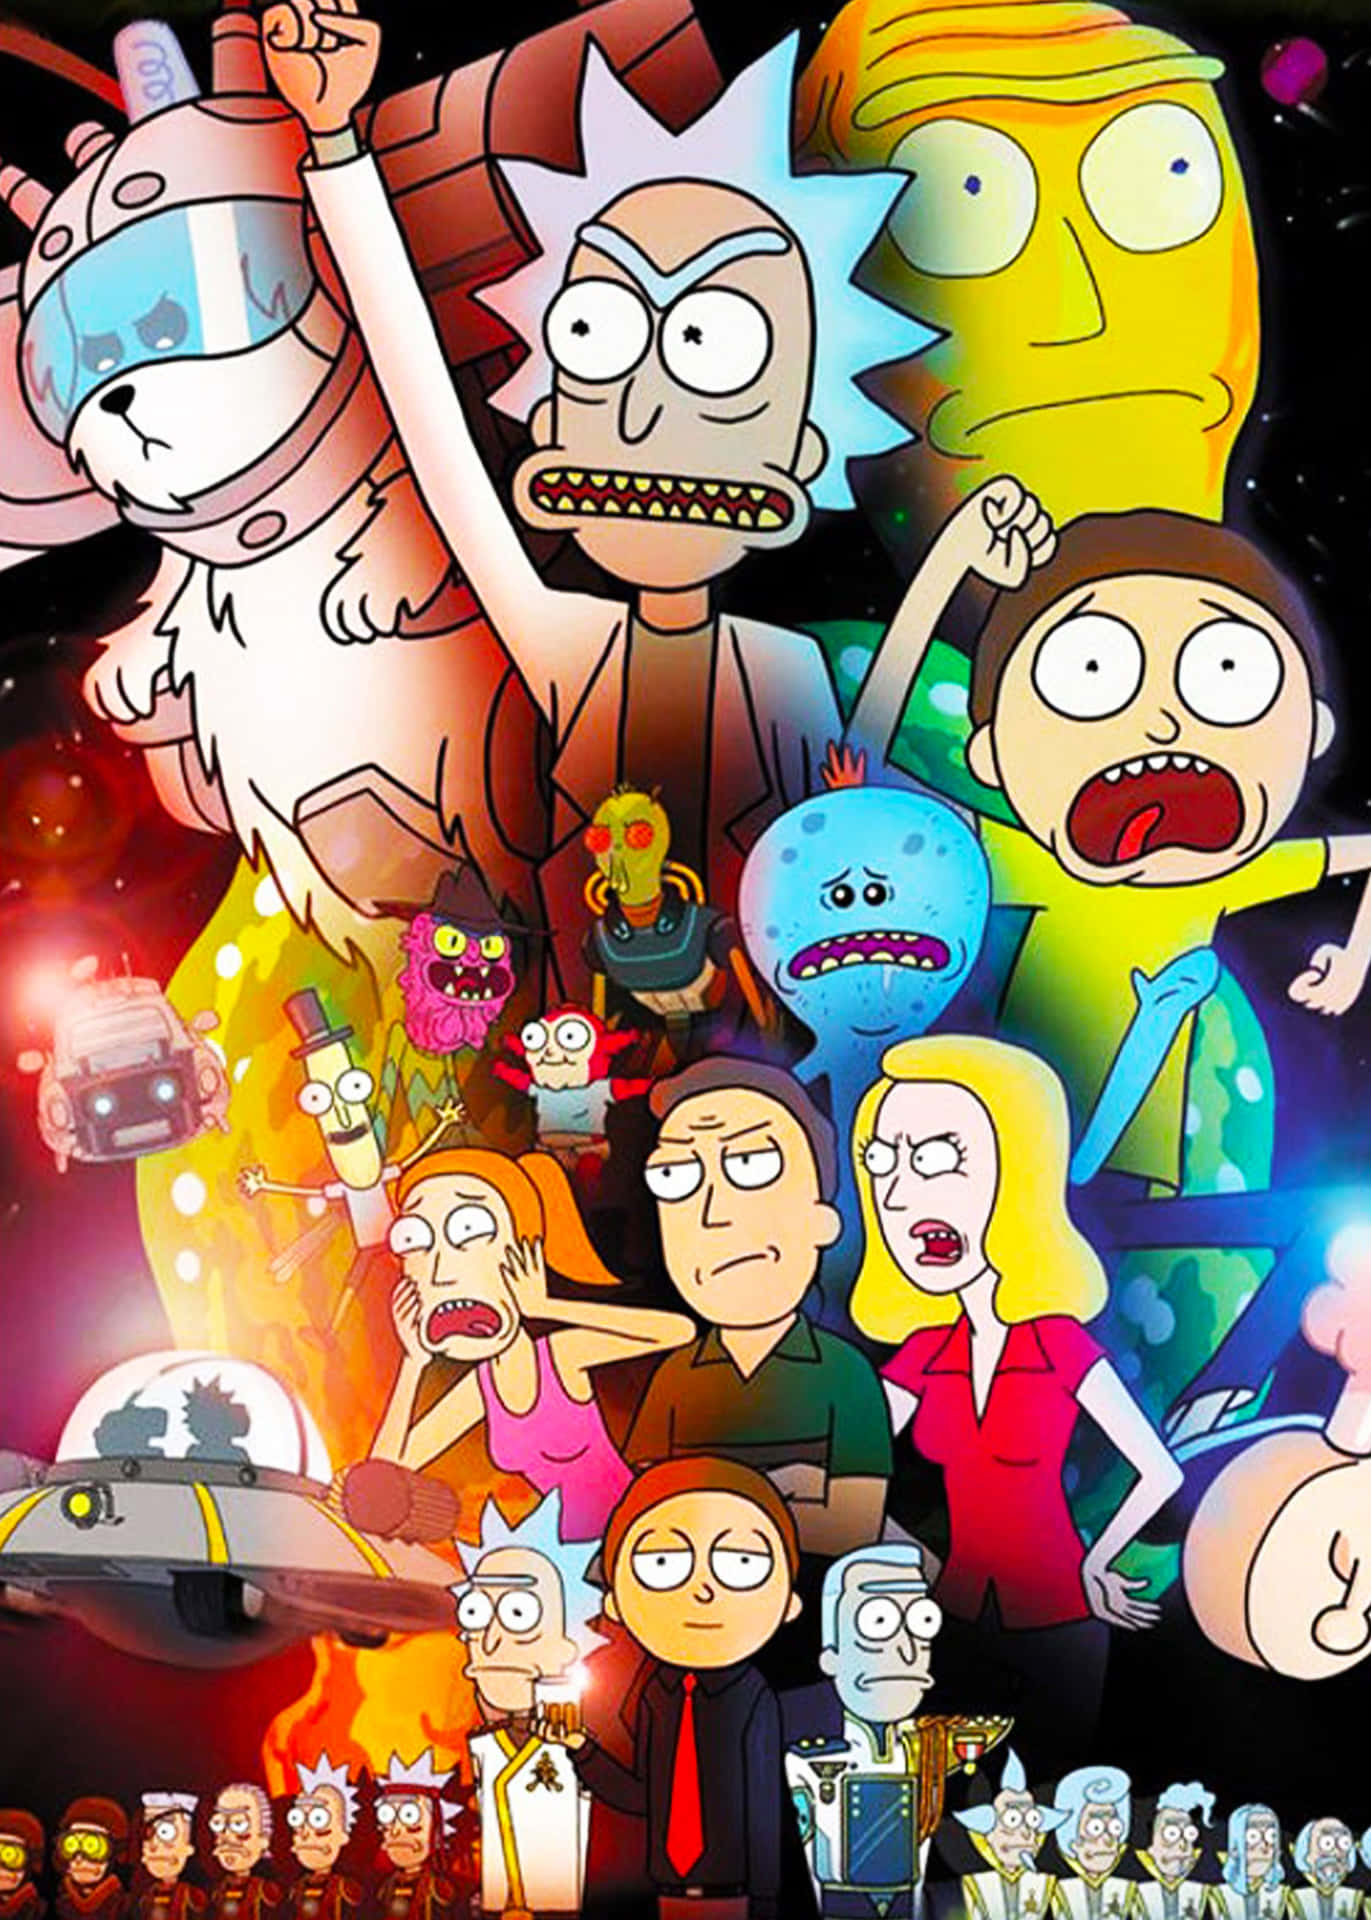 The Council of Ricks gathered in a meeting Wallpaper